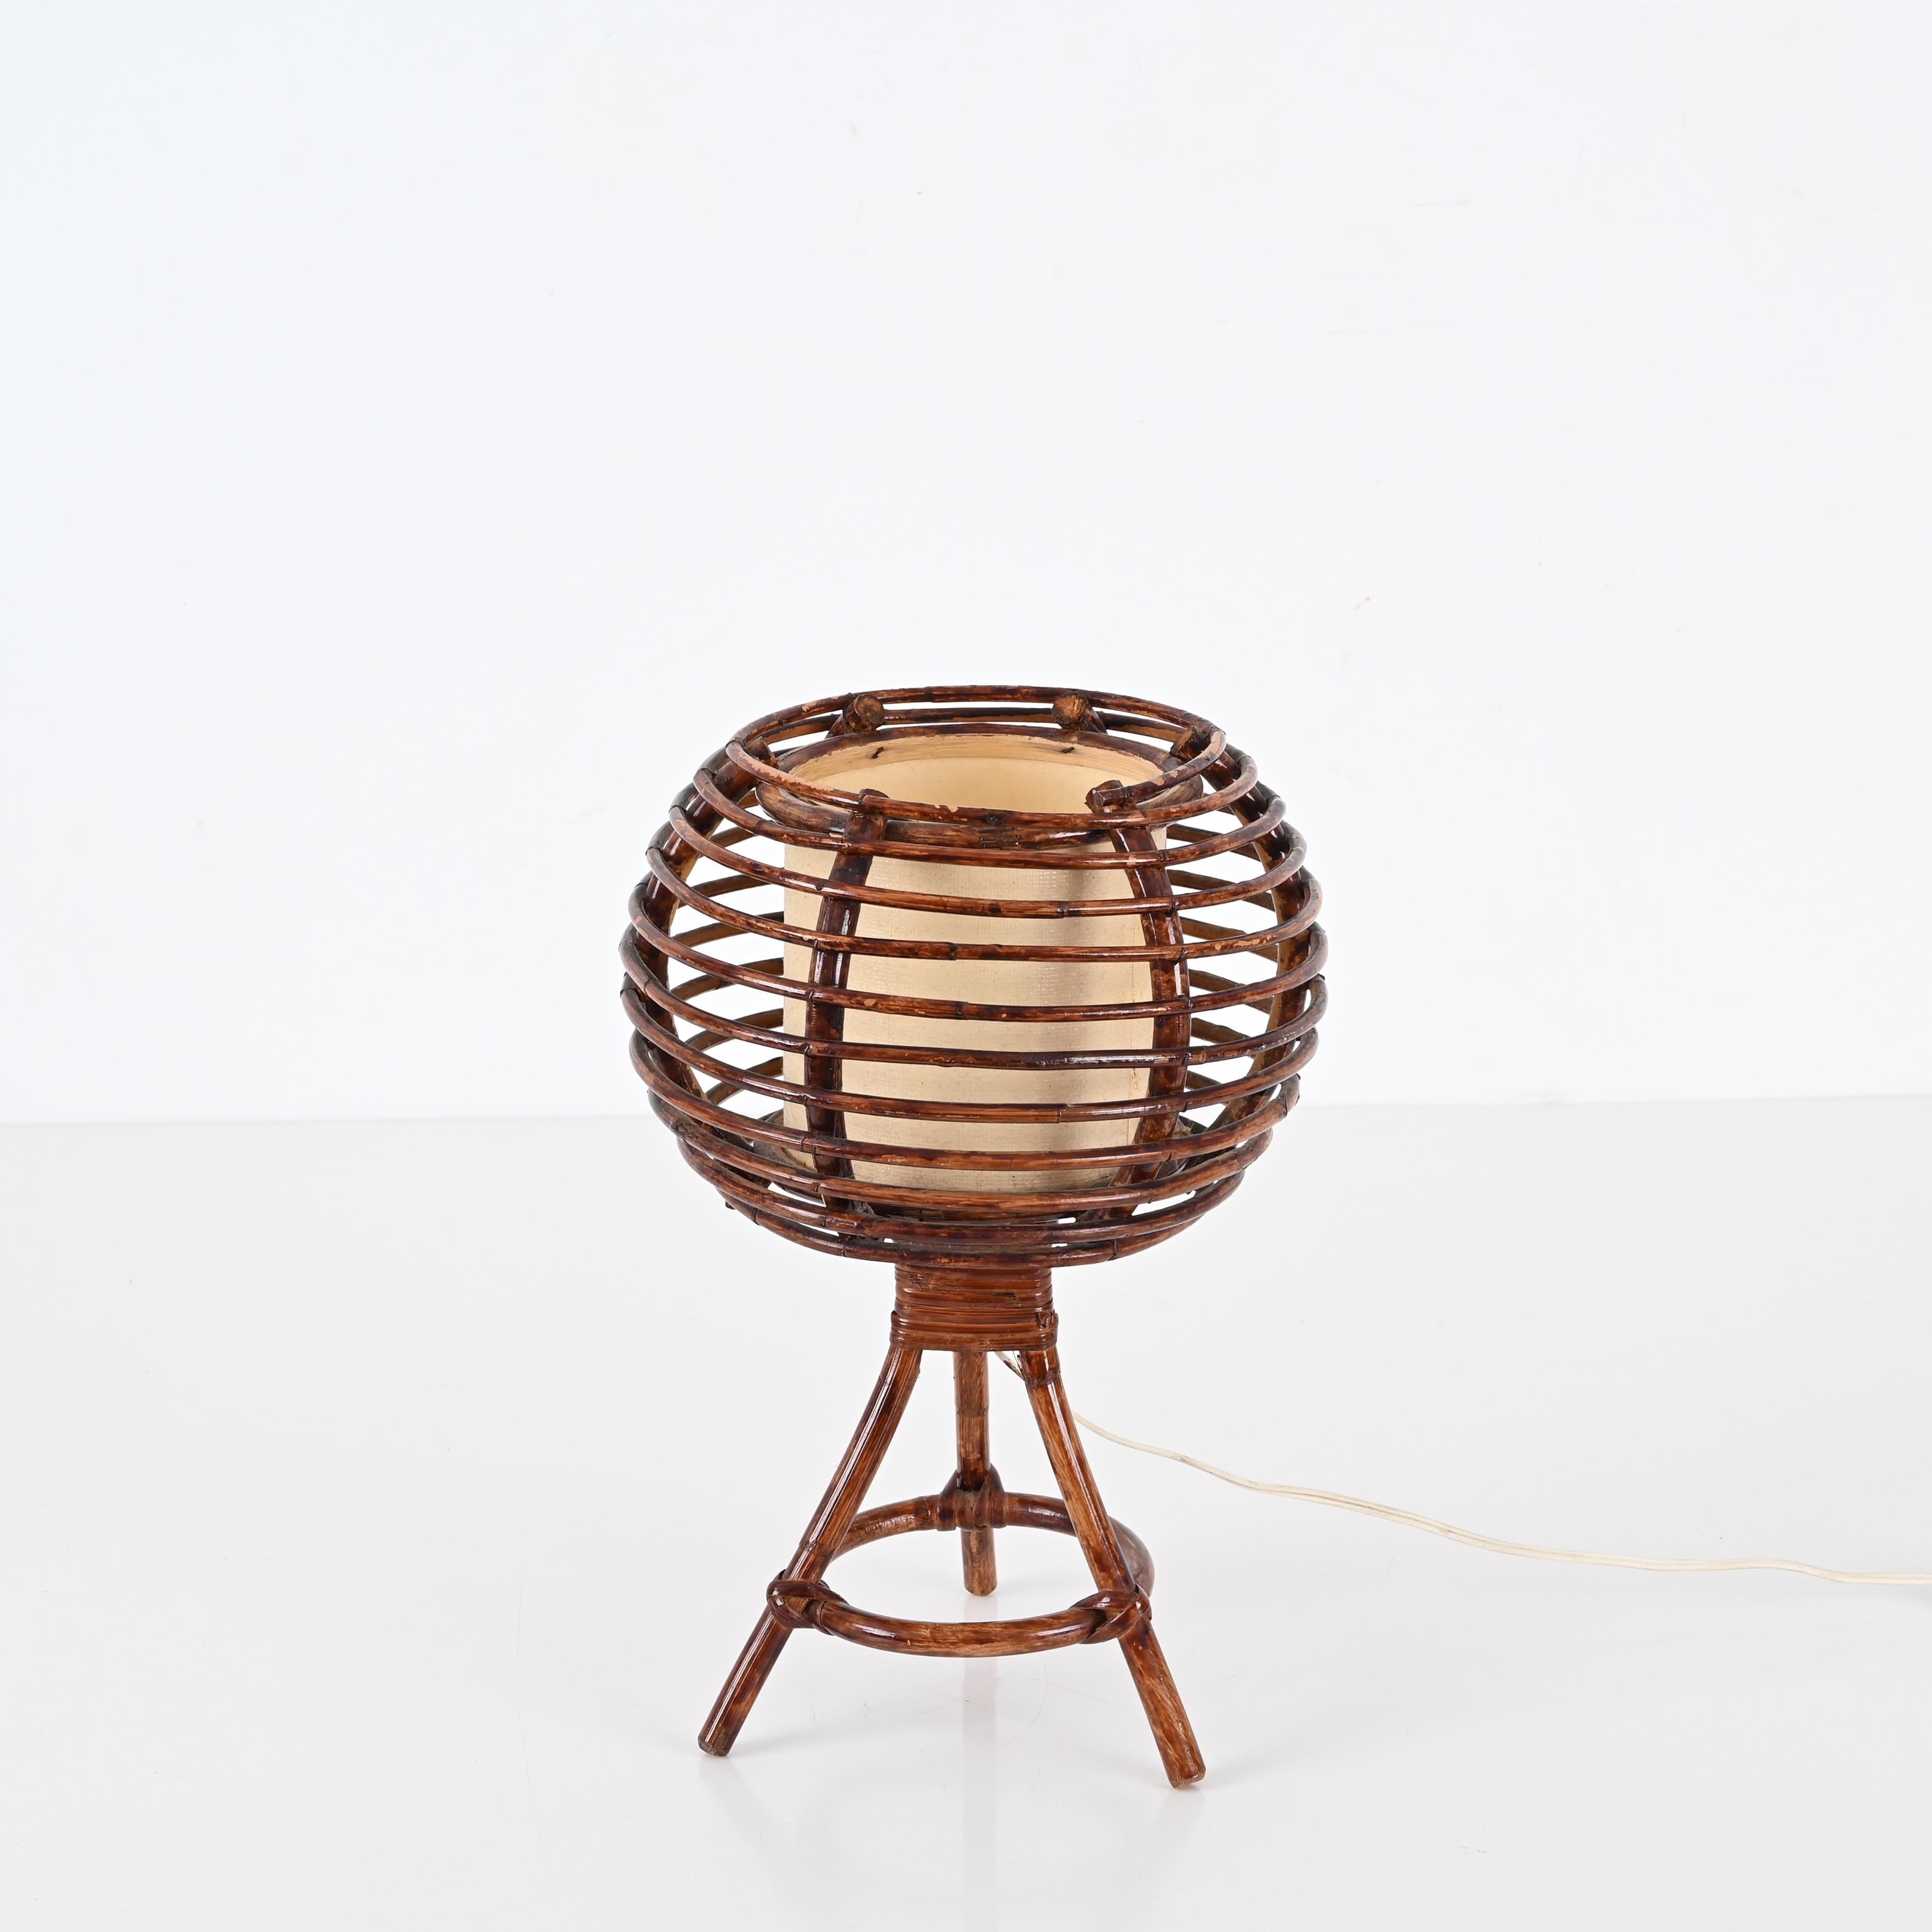 Hand-Woven Louis Sognot Round Table Lamp in Rattan, Wicker, Beige Lampshade, France 1960s